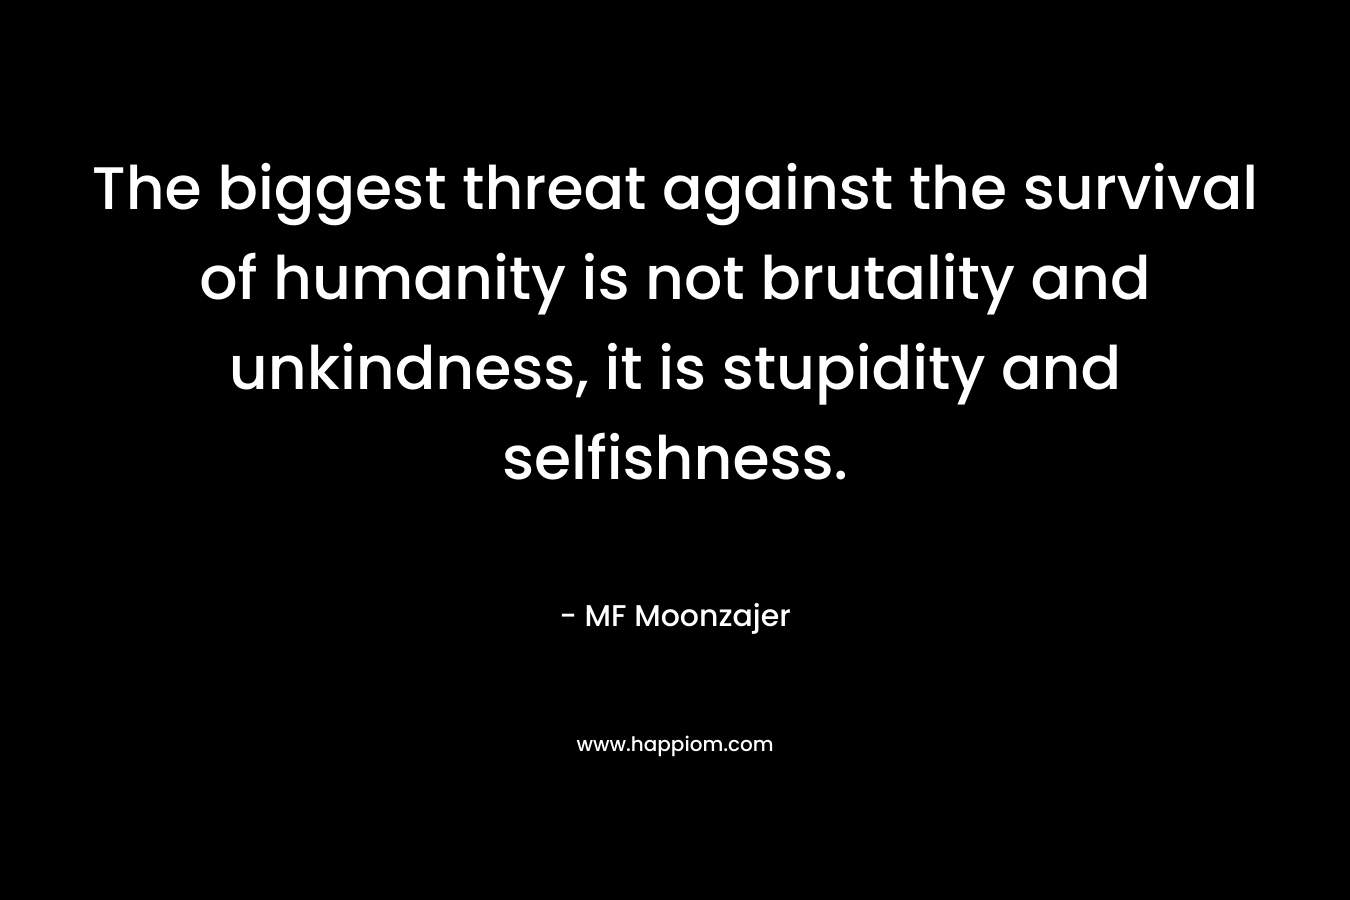 The biggest threat against the survival of humanity is not brutality and unkindness, it is stupidity and selfishness.